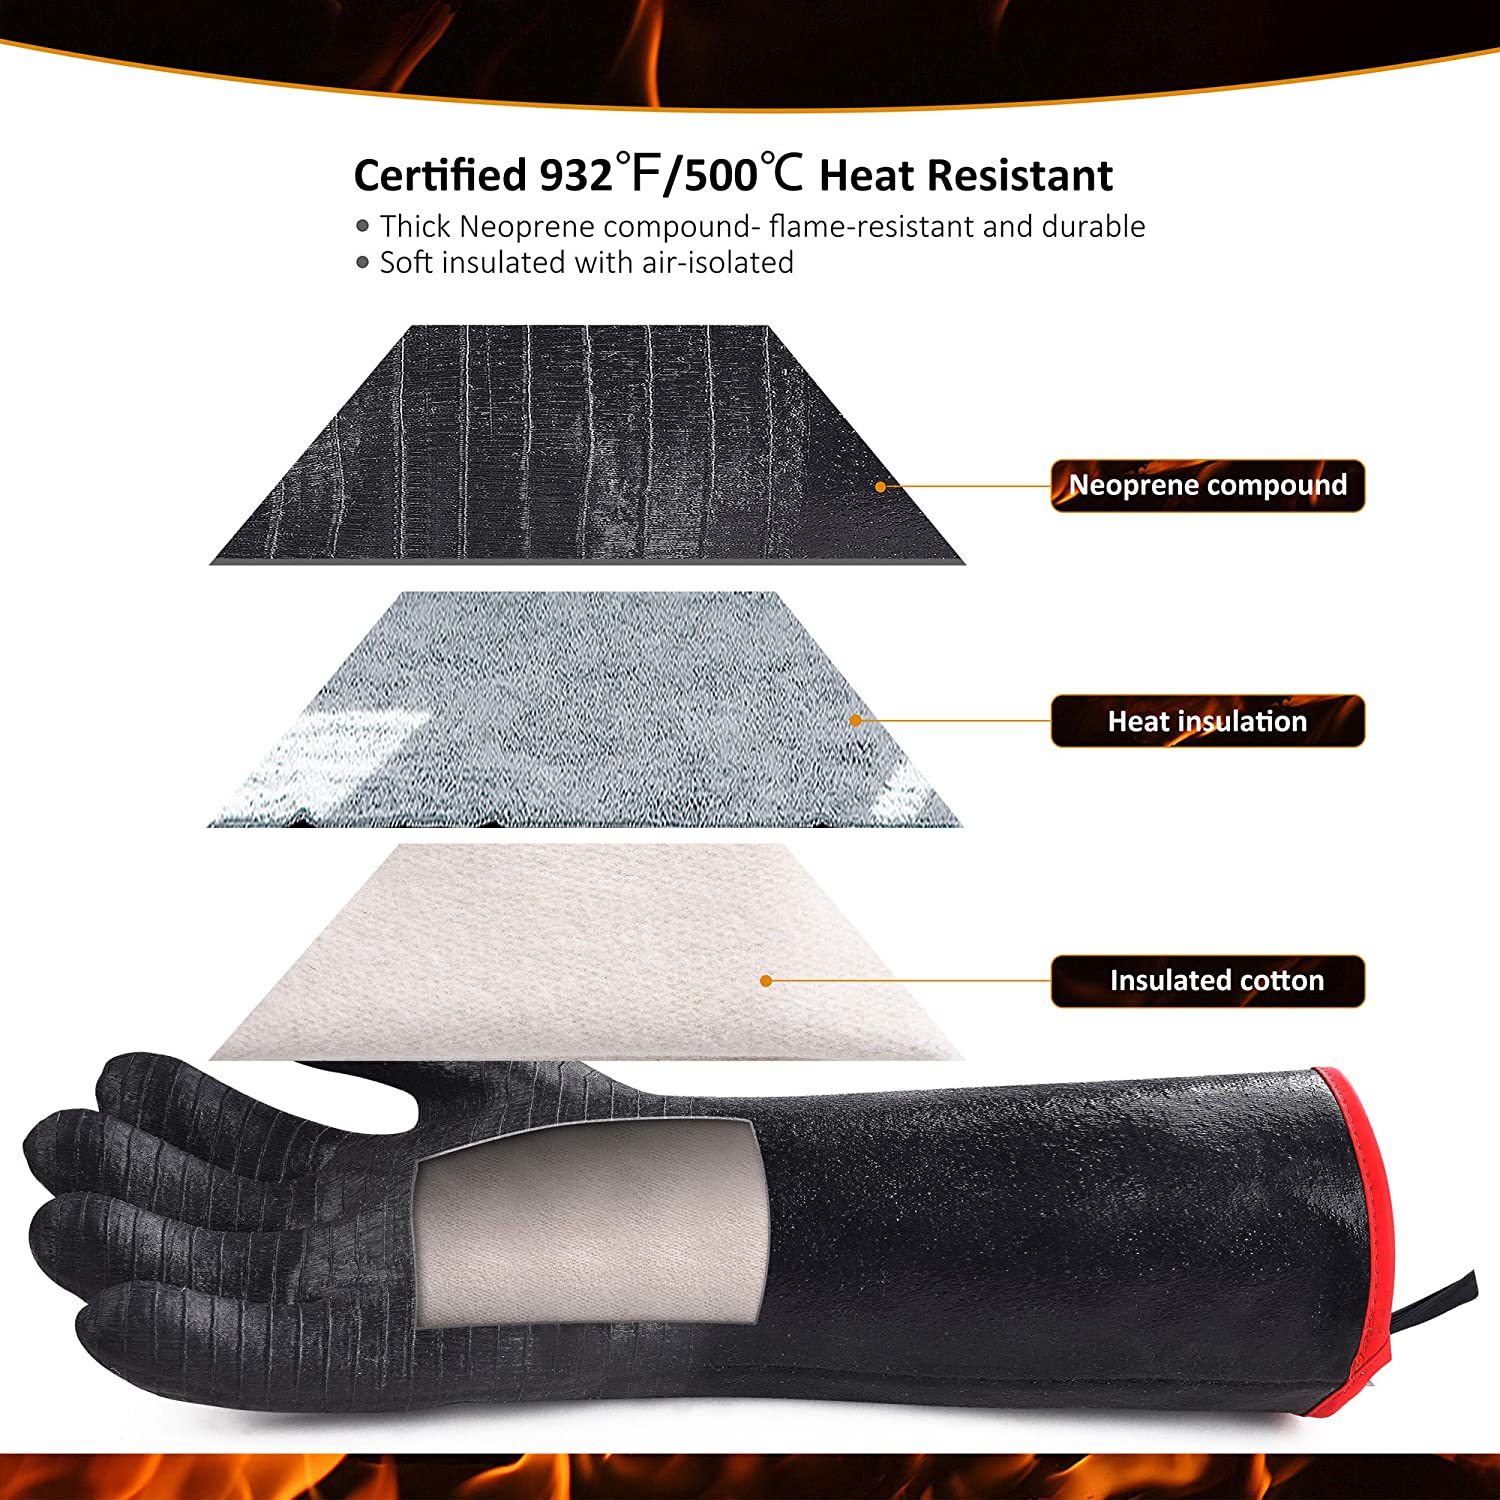 Heat Resistant-Smoker BBQ Gloves 18 Inches,932℉, Grill, Cooking Barbecue Gloves, to Handling Heat Food Right on Your Fryer,Grill,Oven. Waterproof, Fireproof, Oil Resistant Neoprene Coating - image 2 of 7